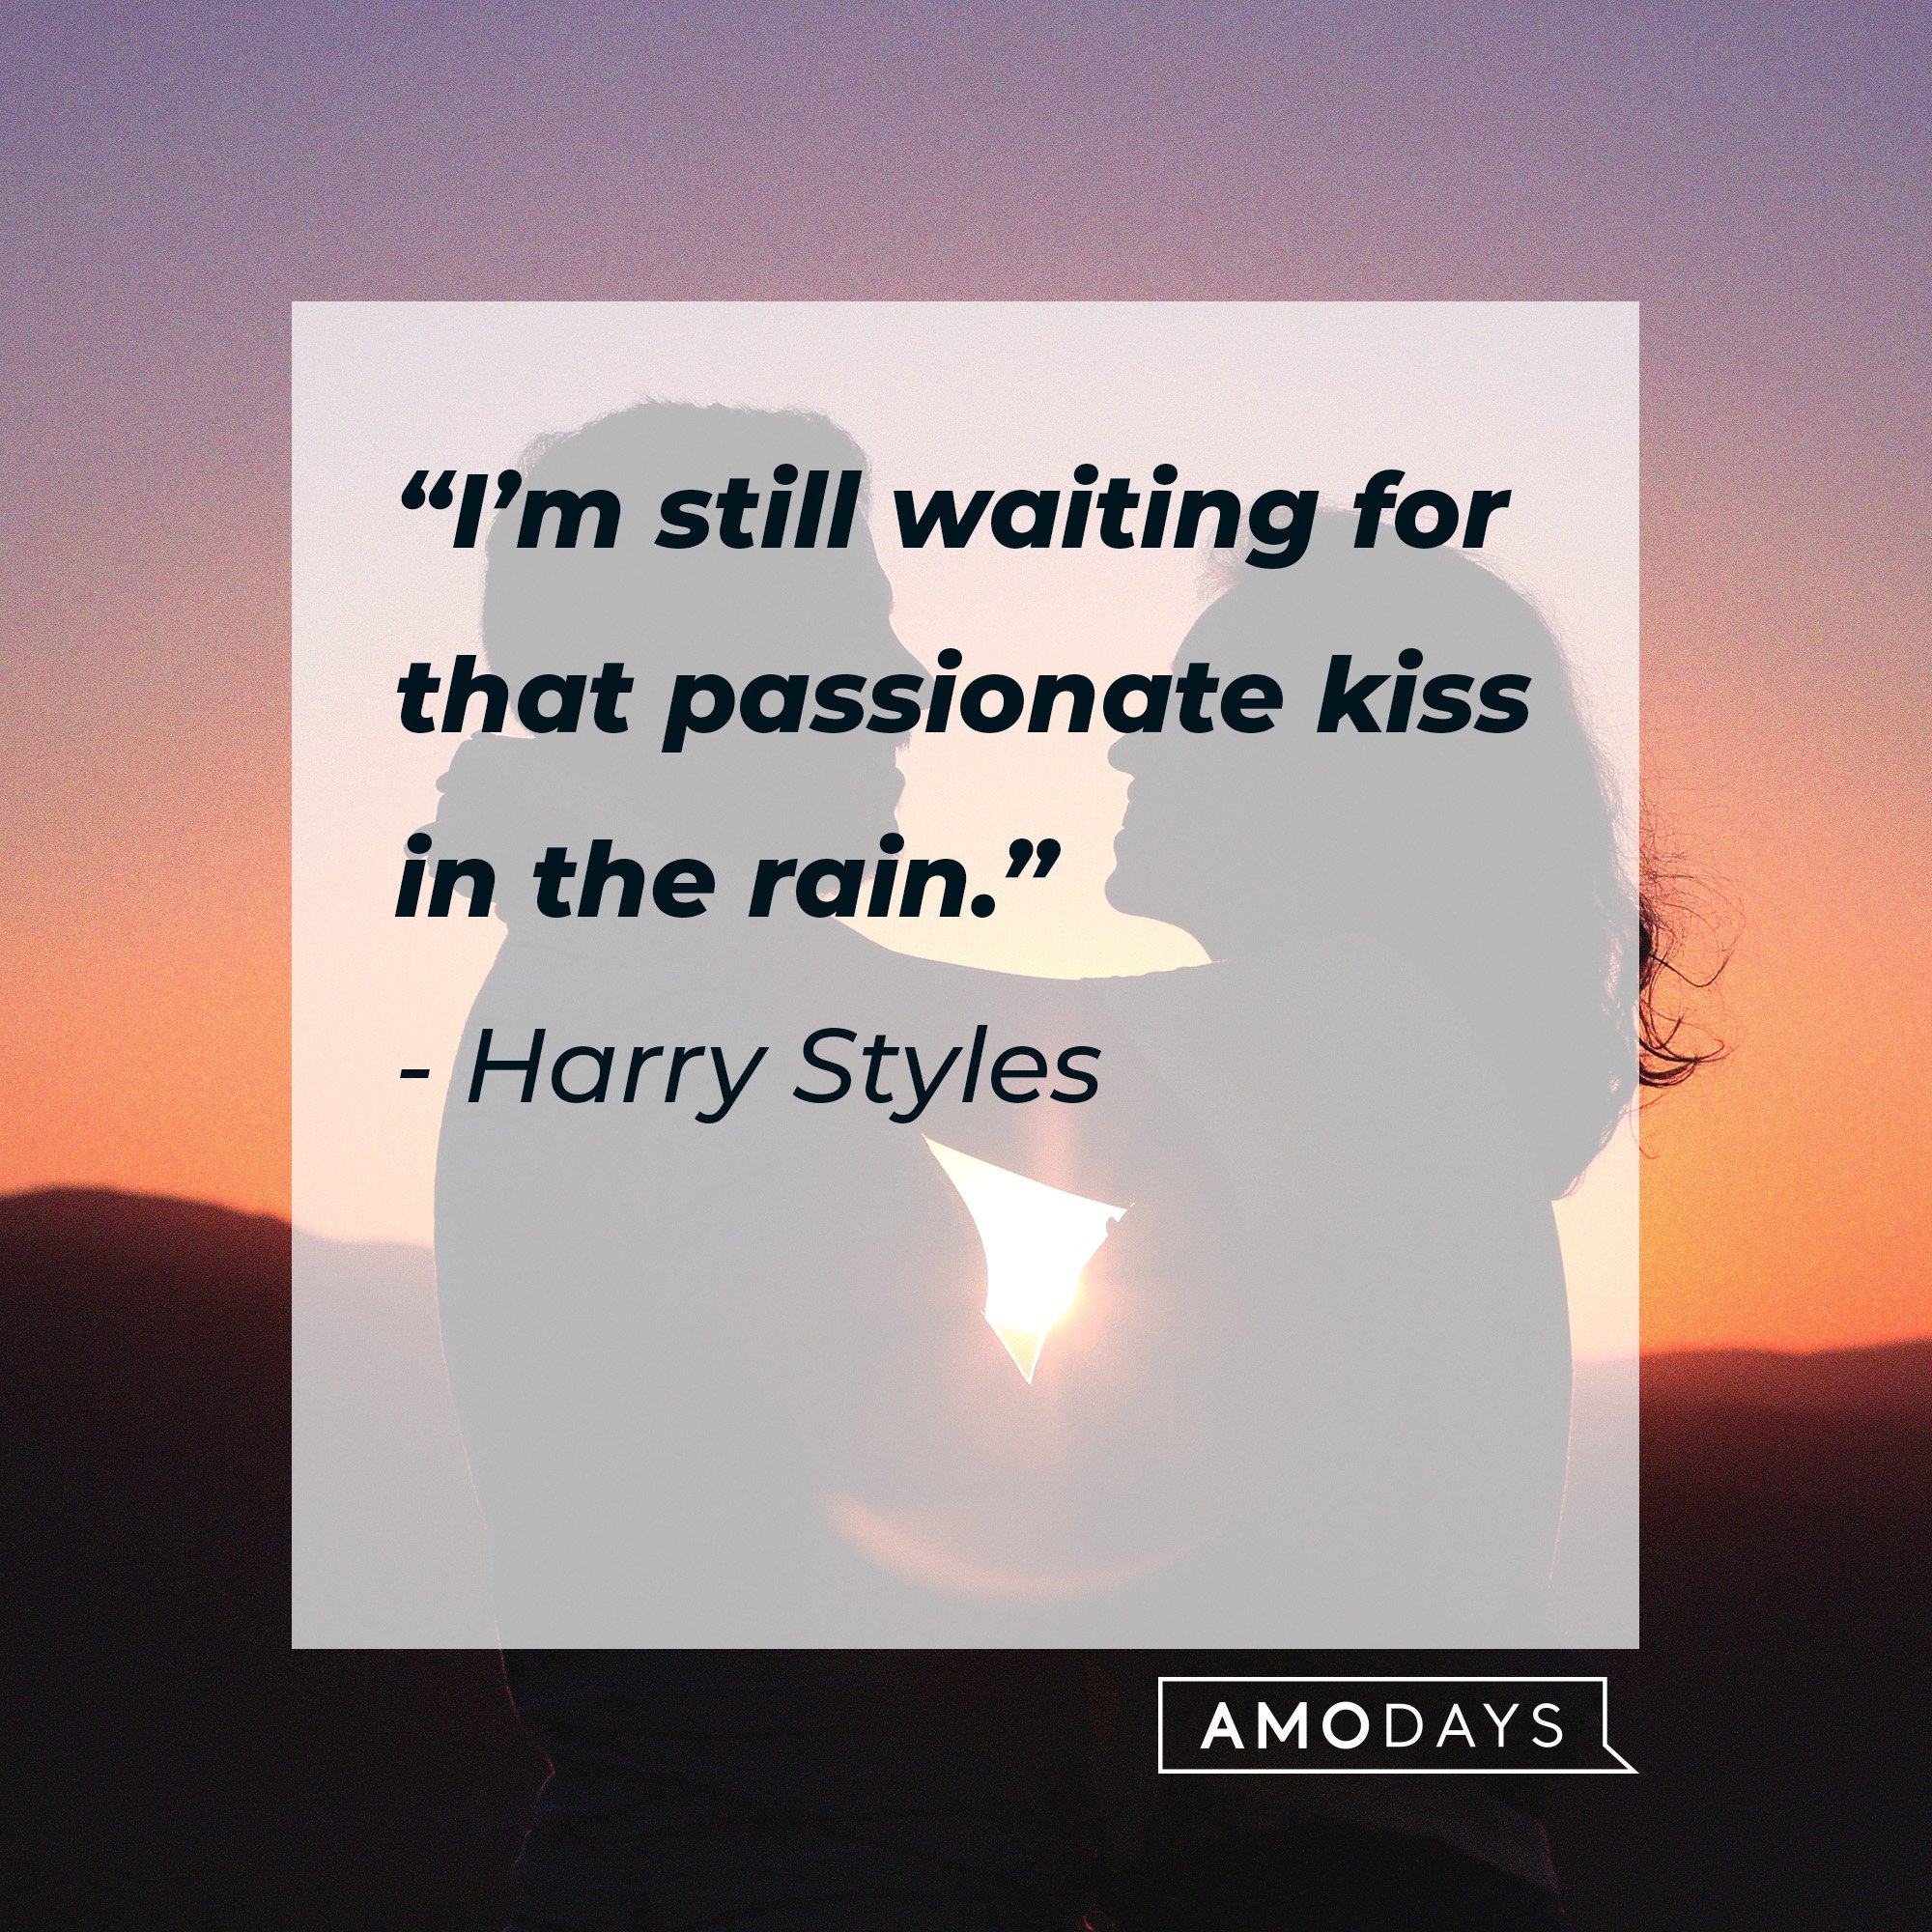 Harry Styles’ quote: "I’m still waiting for that passionate kiss in the rain."  |  Source: AmoDays